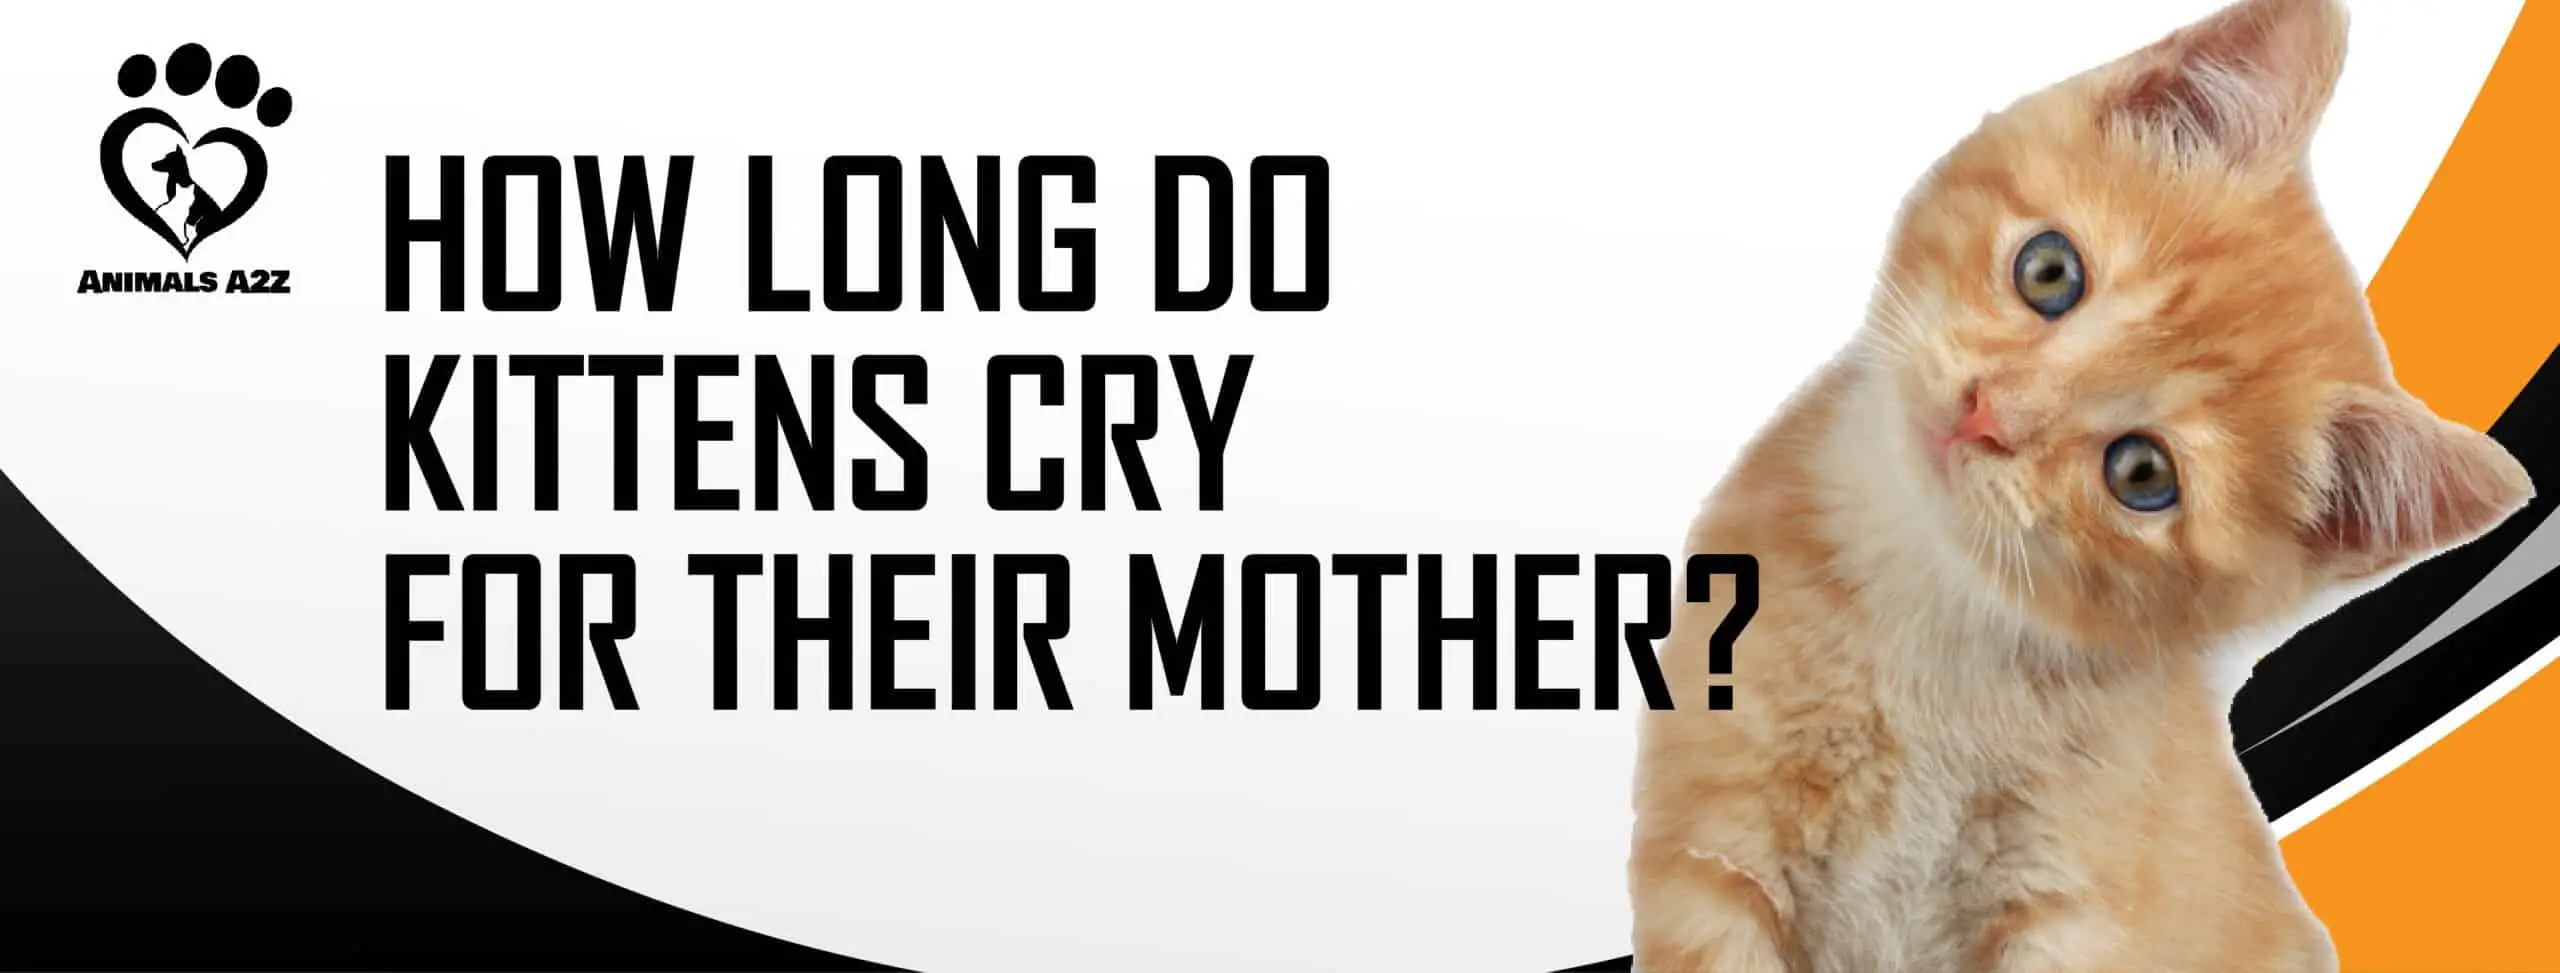 How long do kittens cry for their mother